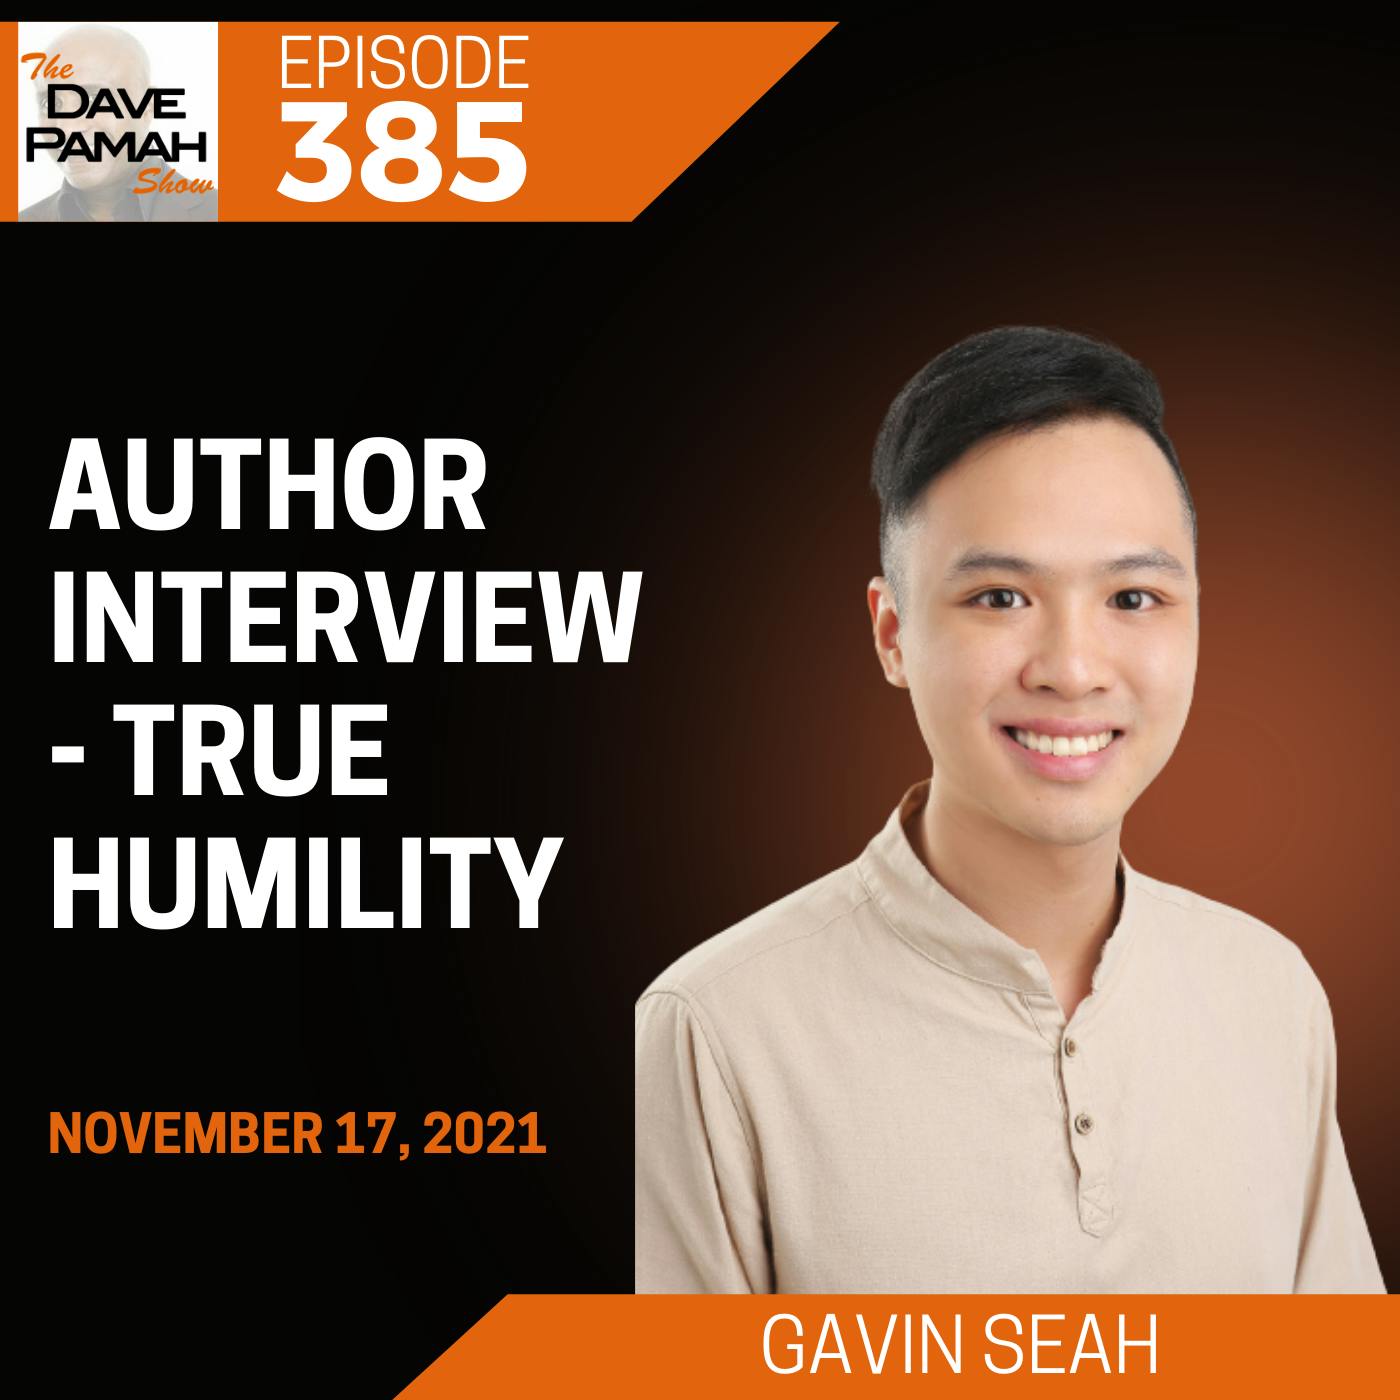 Author Interview - True Humility with Gavin Seah